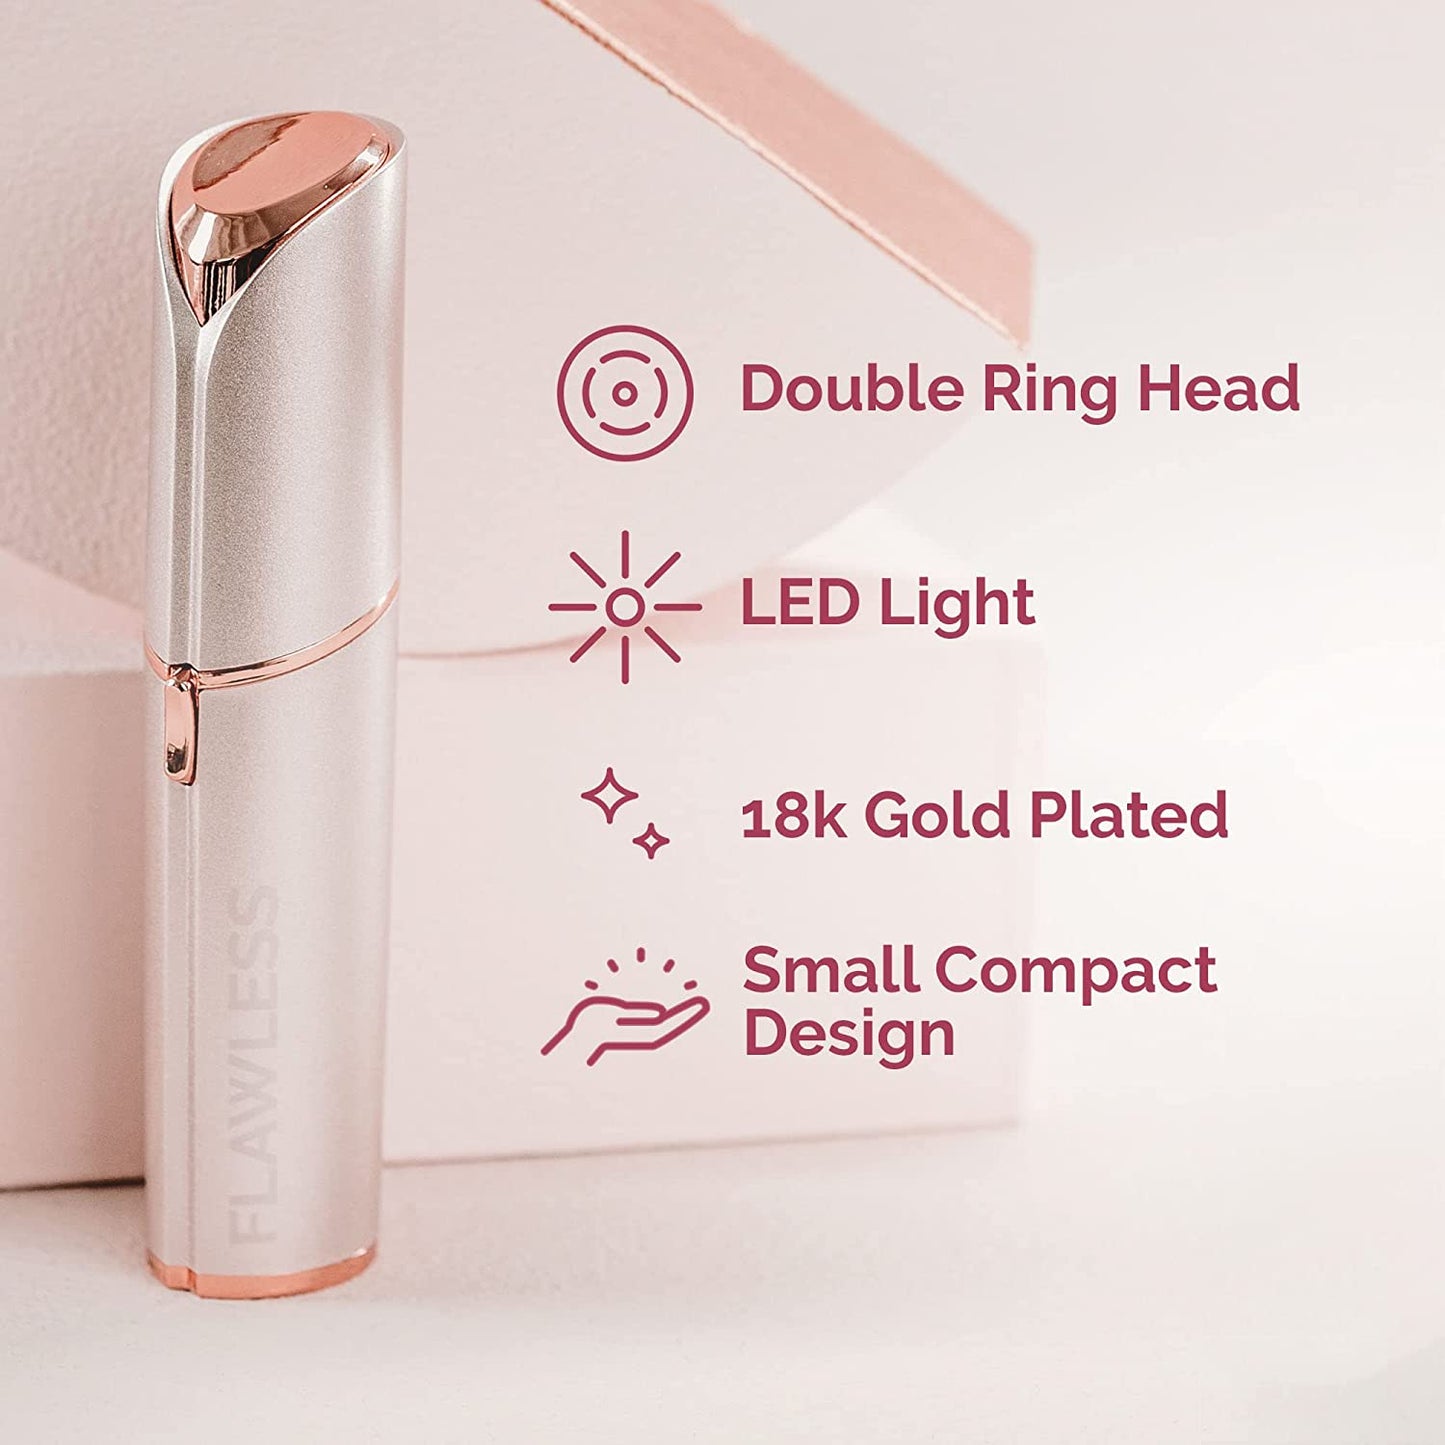 TOUCH Flawless Women's Painless Hair Remover, Mermaid/Rose Gold